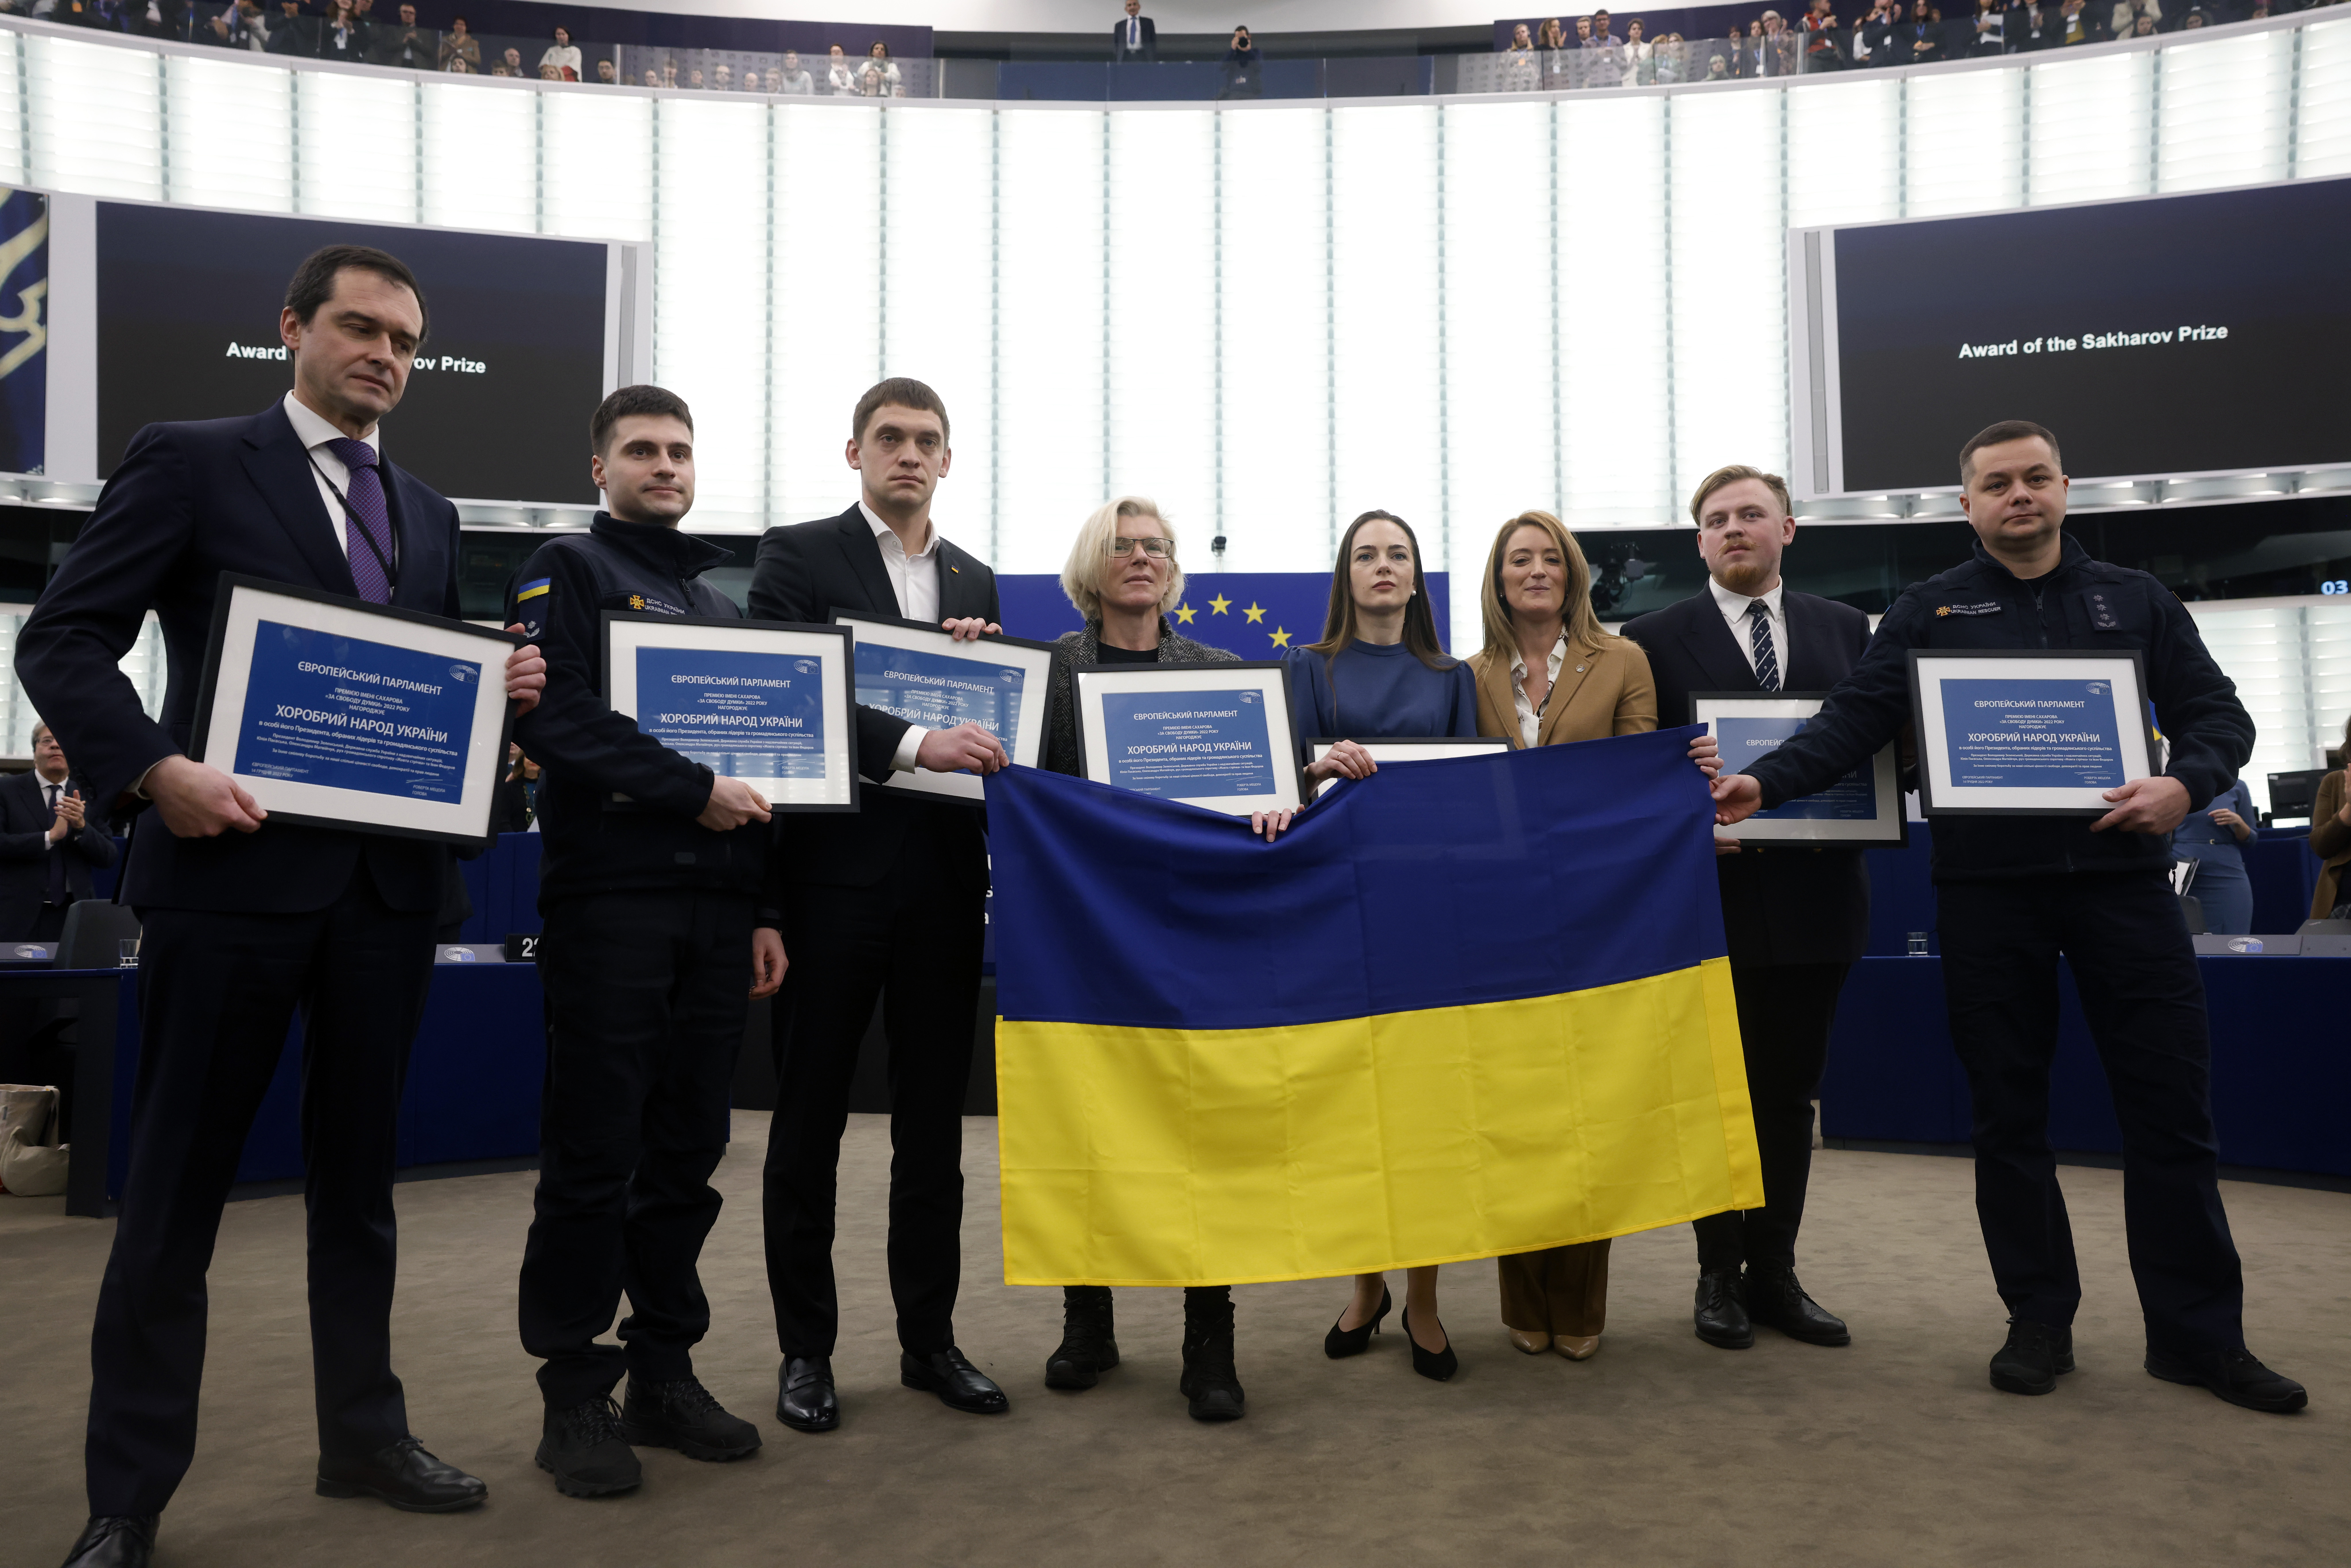 (L-R), Mission of Ukraine to the EU, State Emergency Services of Ukraine, Mayor of Ukrainian city of Melitopol, Founder of the medical evacuation unit Angels of Taira, Nobel Peace Prize winner Oleksandra Matviichuk, Spokesperson of the Yellow Ribbon Civil Resistance Movement and Director of State Emergency Services of Ukraine pose with European Parliament President Roberta Metsola (third right) after receiving the Sakharov Prize